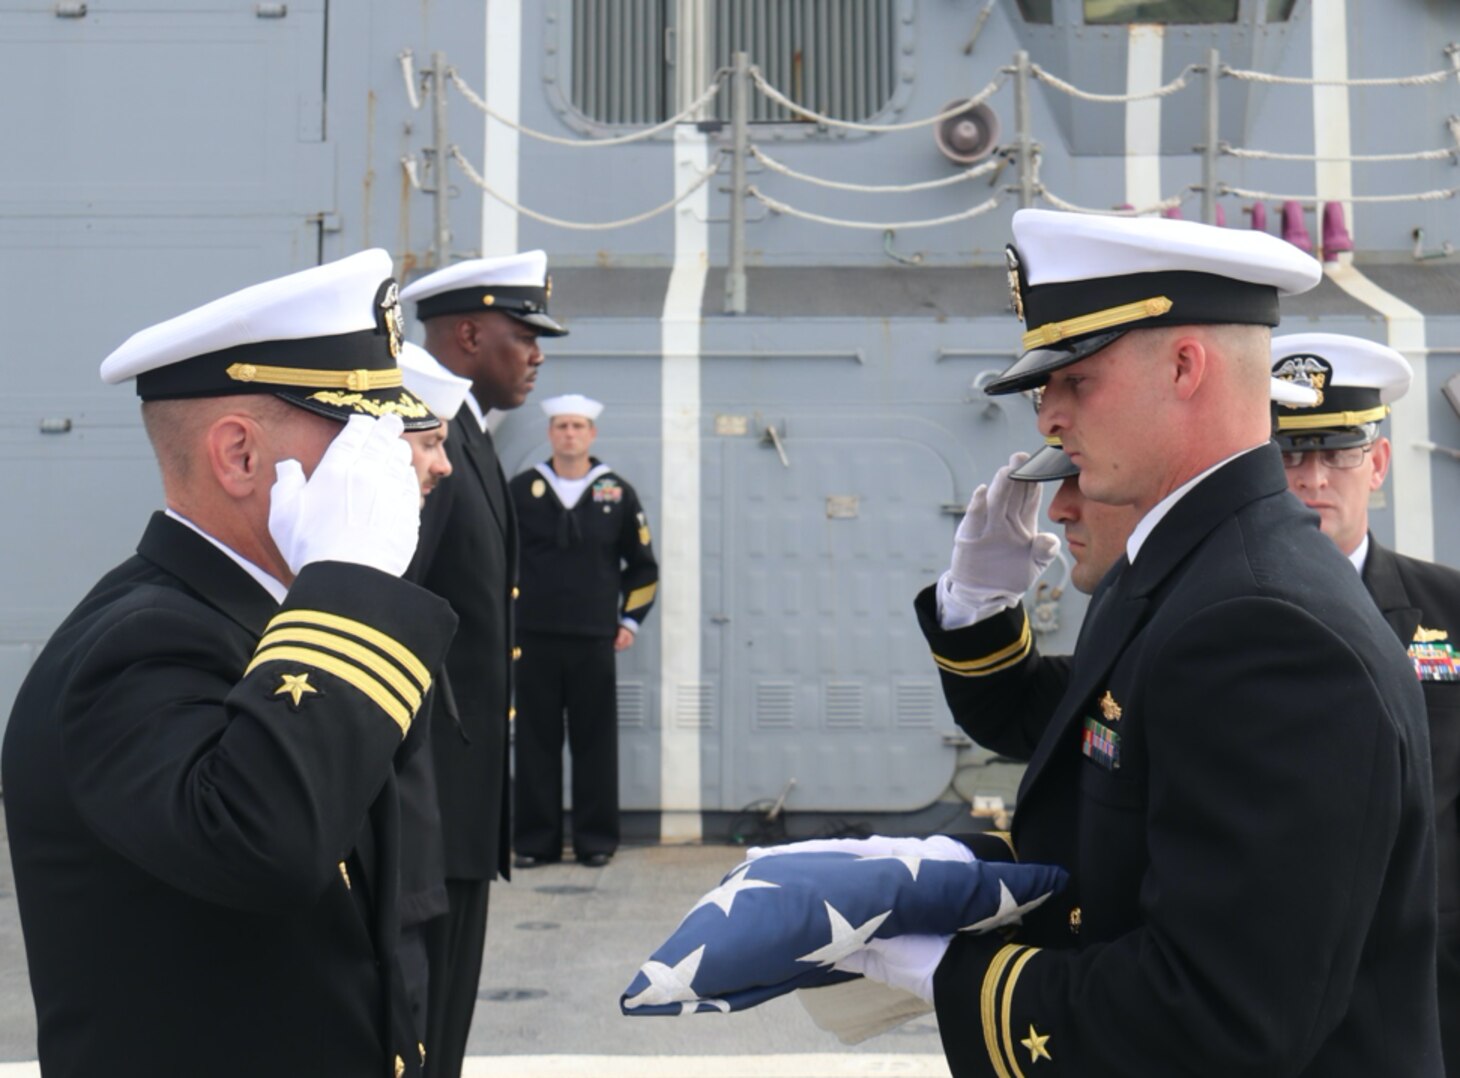 Cmdr. Jason Horning prepares to receive the American flag from Lt. j. g. Alexander Armstrong during a Burial at Sea ceremony, Nov. 14. (Photo by Ens. Alexander Simon)